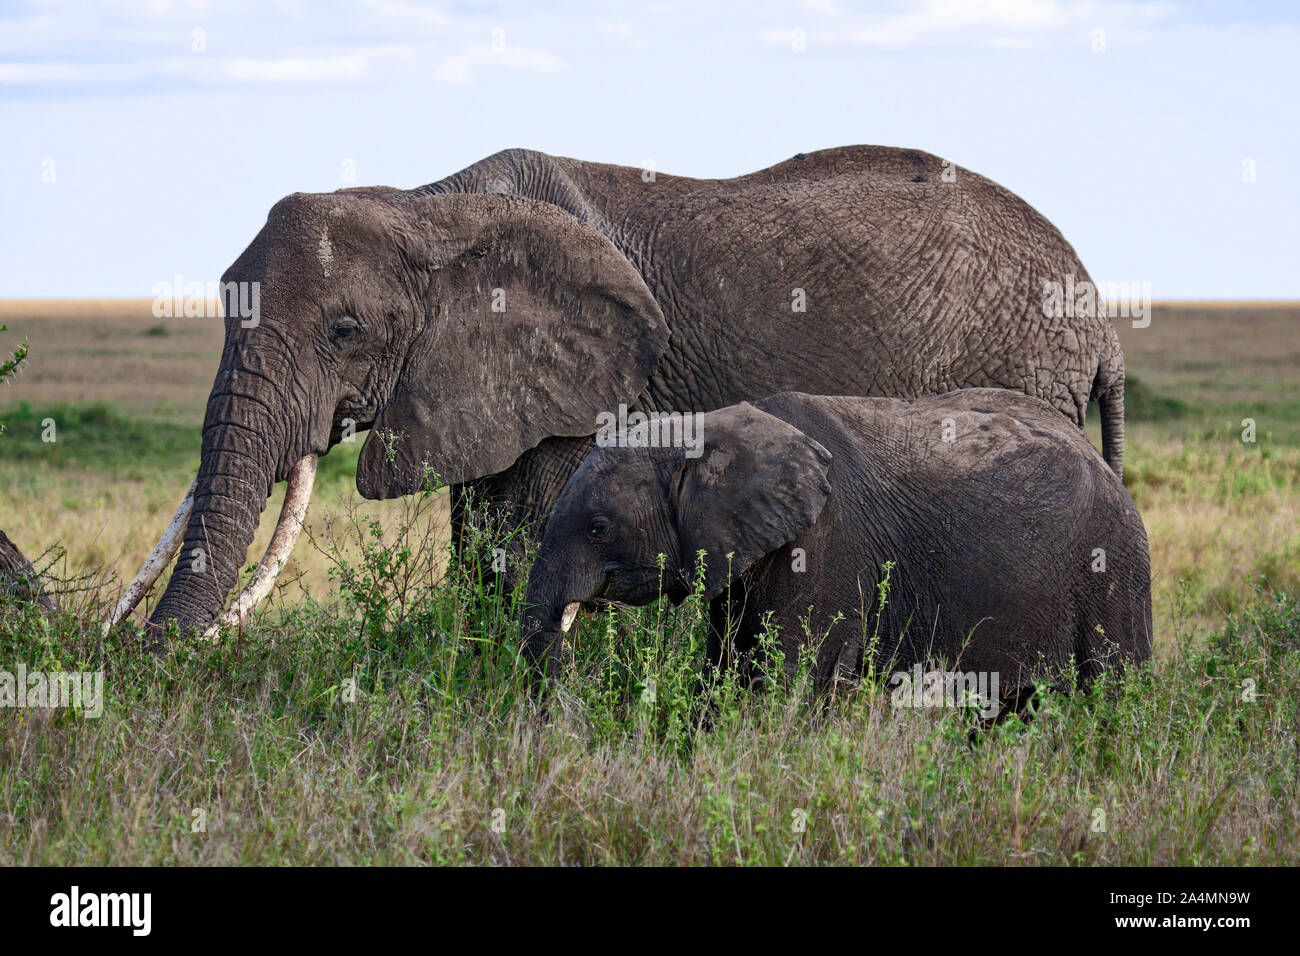 African elephants, mother and young eating, Loxodanta africana, herbivores, largest land mammal, muscular trunk, tusks, large ears, wildlife, animal, Stock Photo